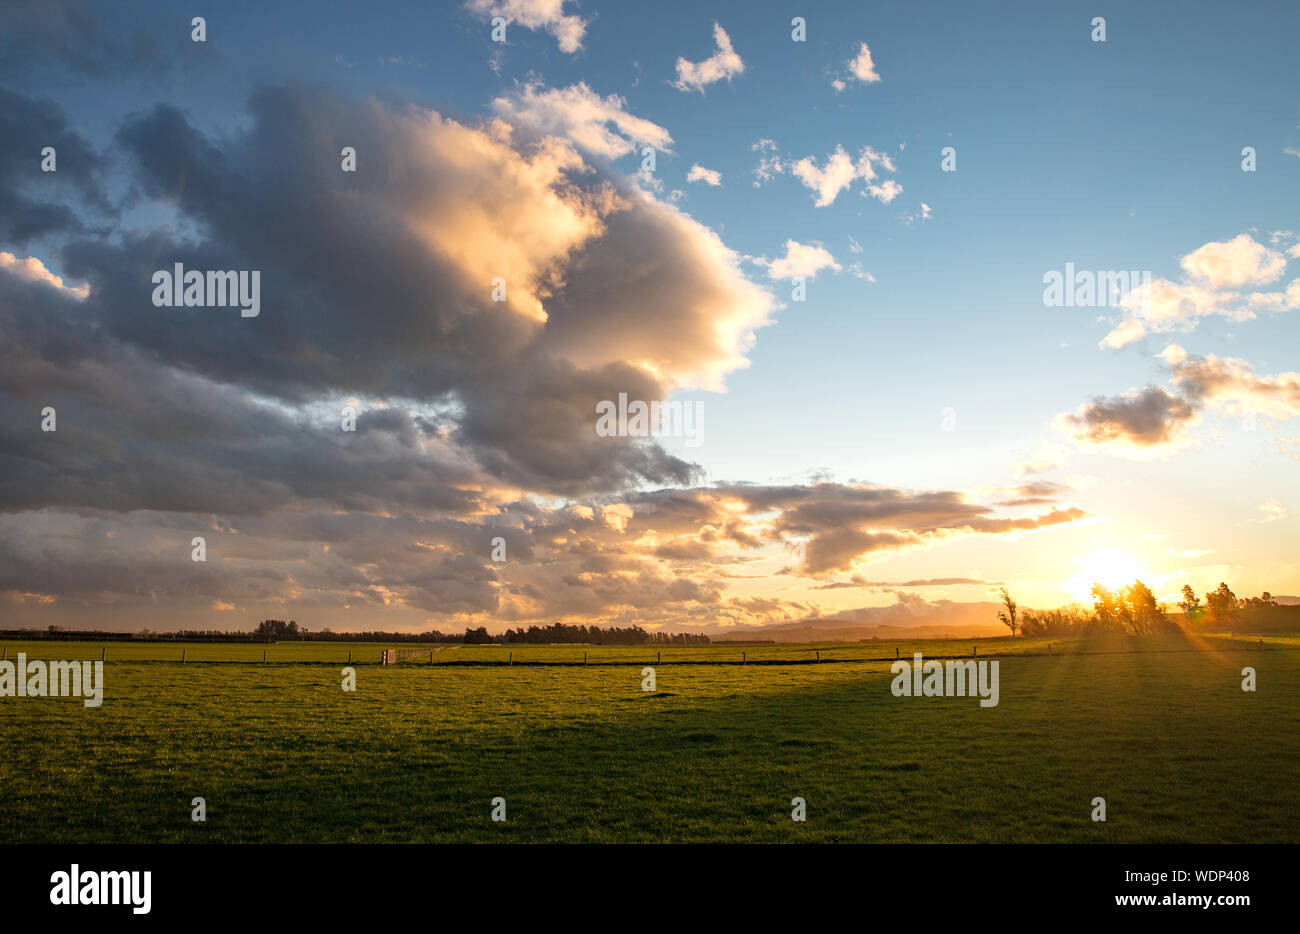 The view along a rural Canterbury road over farmland at sunset, New Zealand Stock Photo